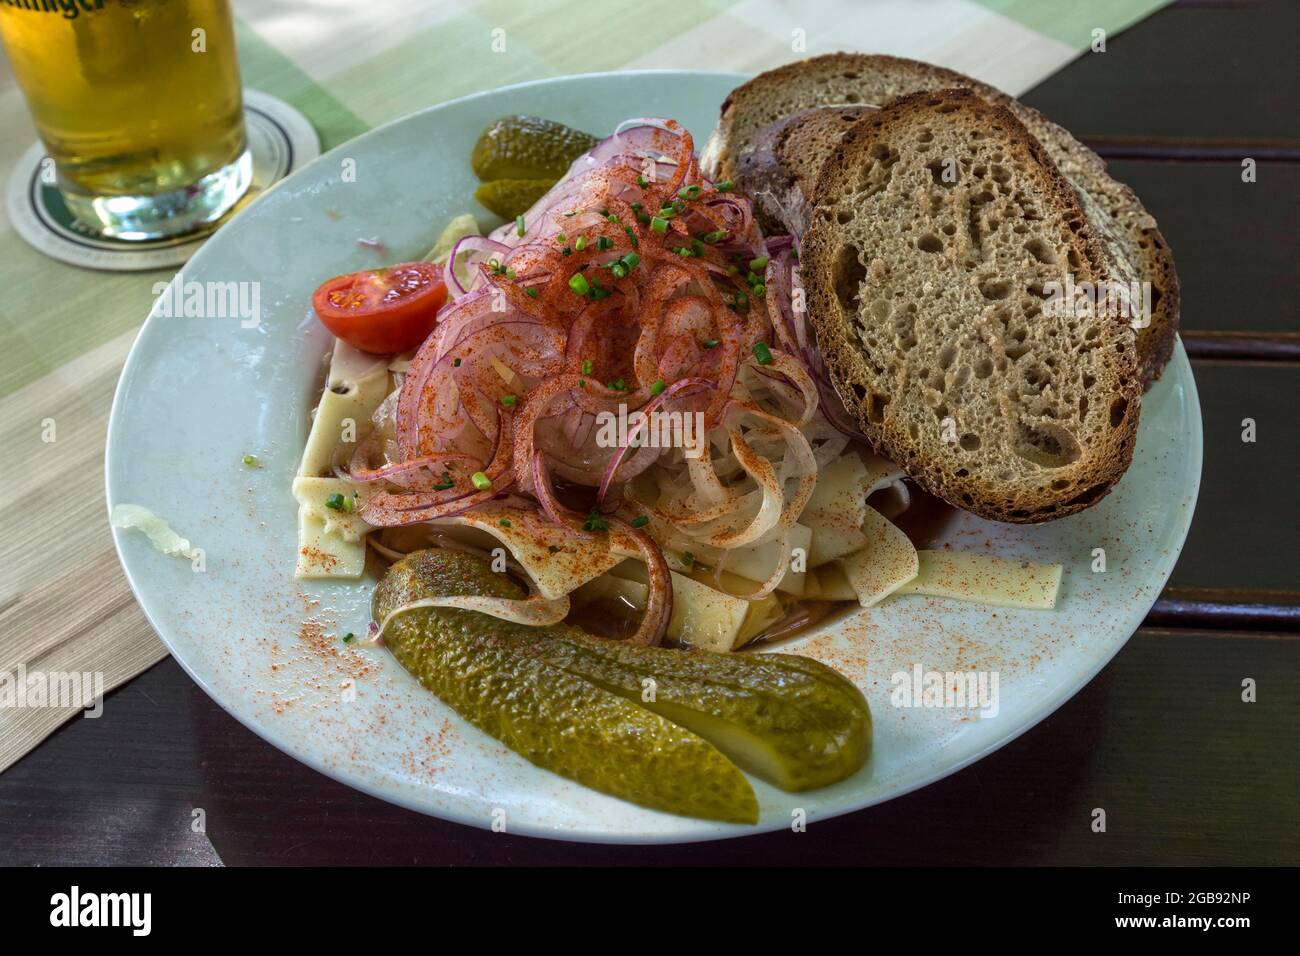 Swiss sausage salad with bread on a plate in a garden restaurant, Regensburg, Upper Palatinate, Bavaria, Germany Stock Photo